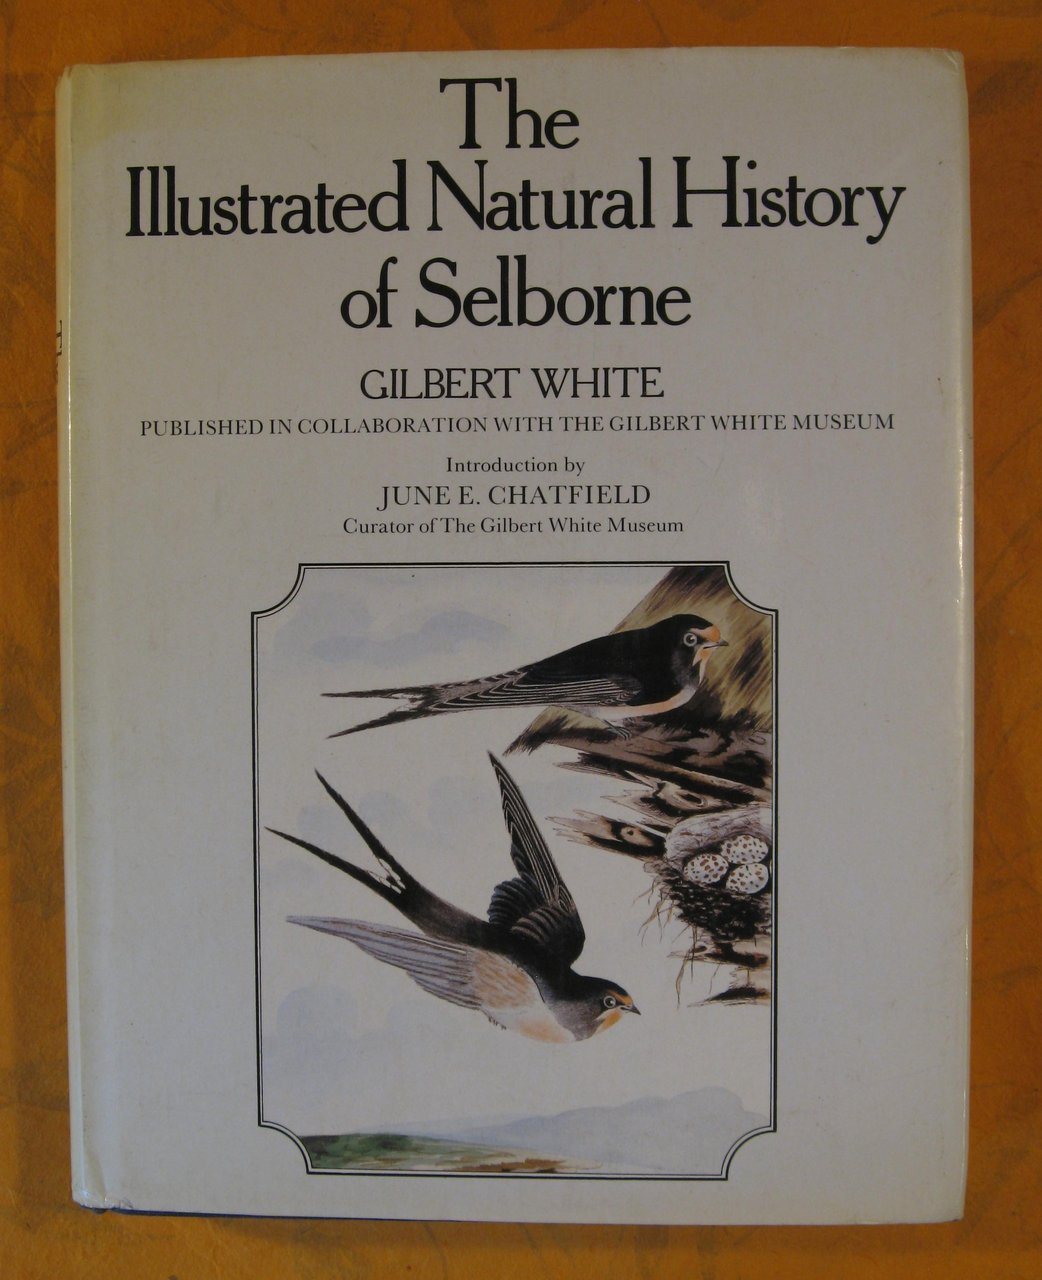 The Illustrated Natural History of Selborne